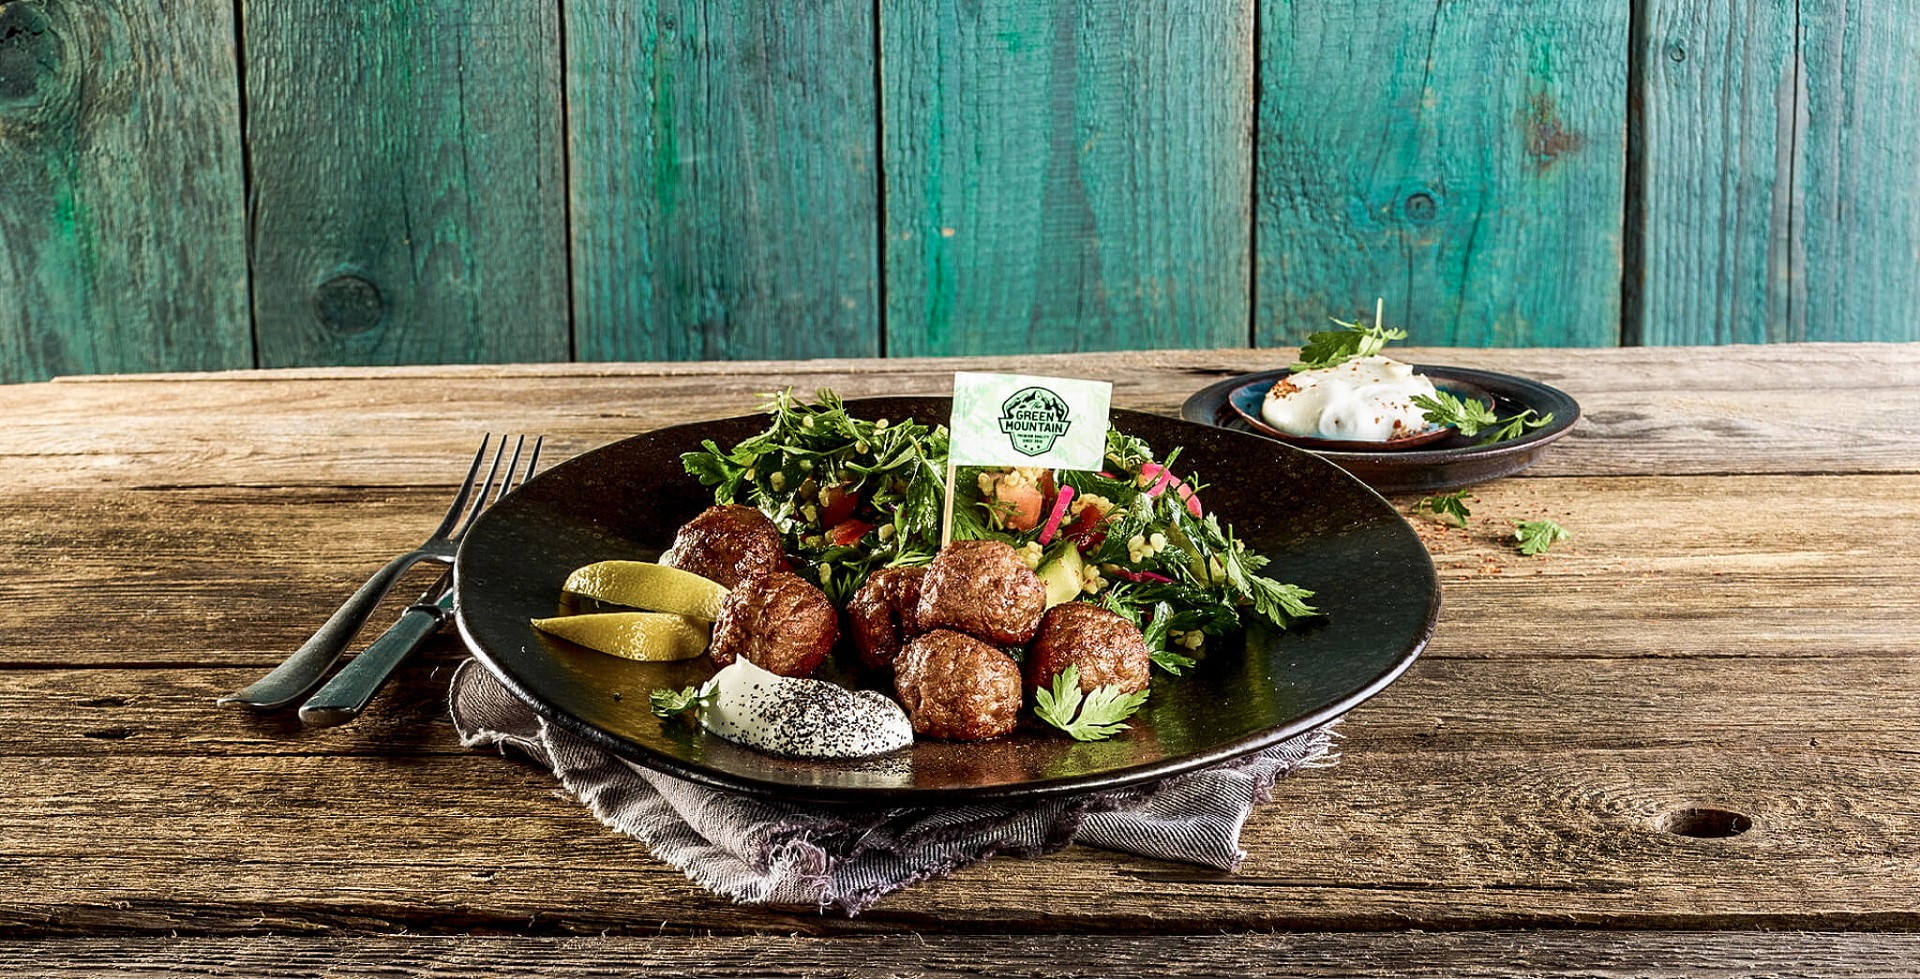 vegan meatballs from Green Mountain with persil salad